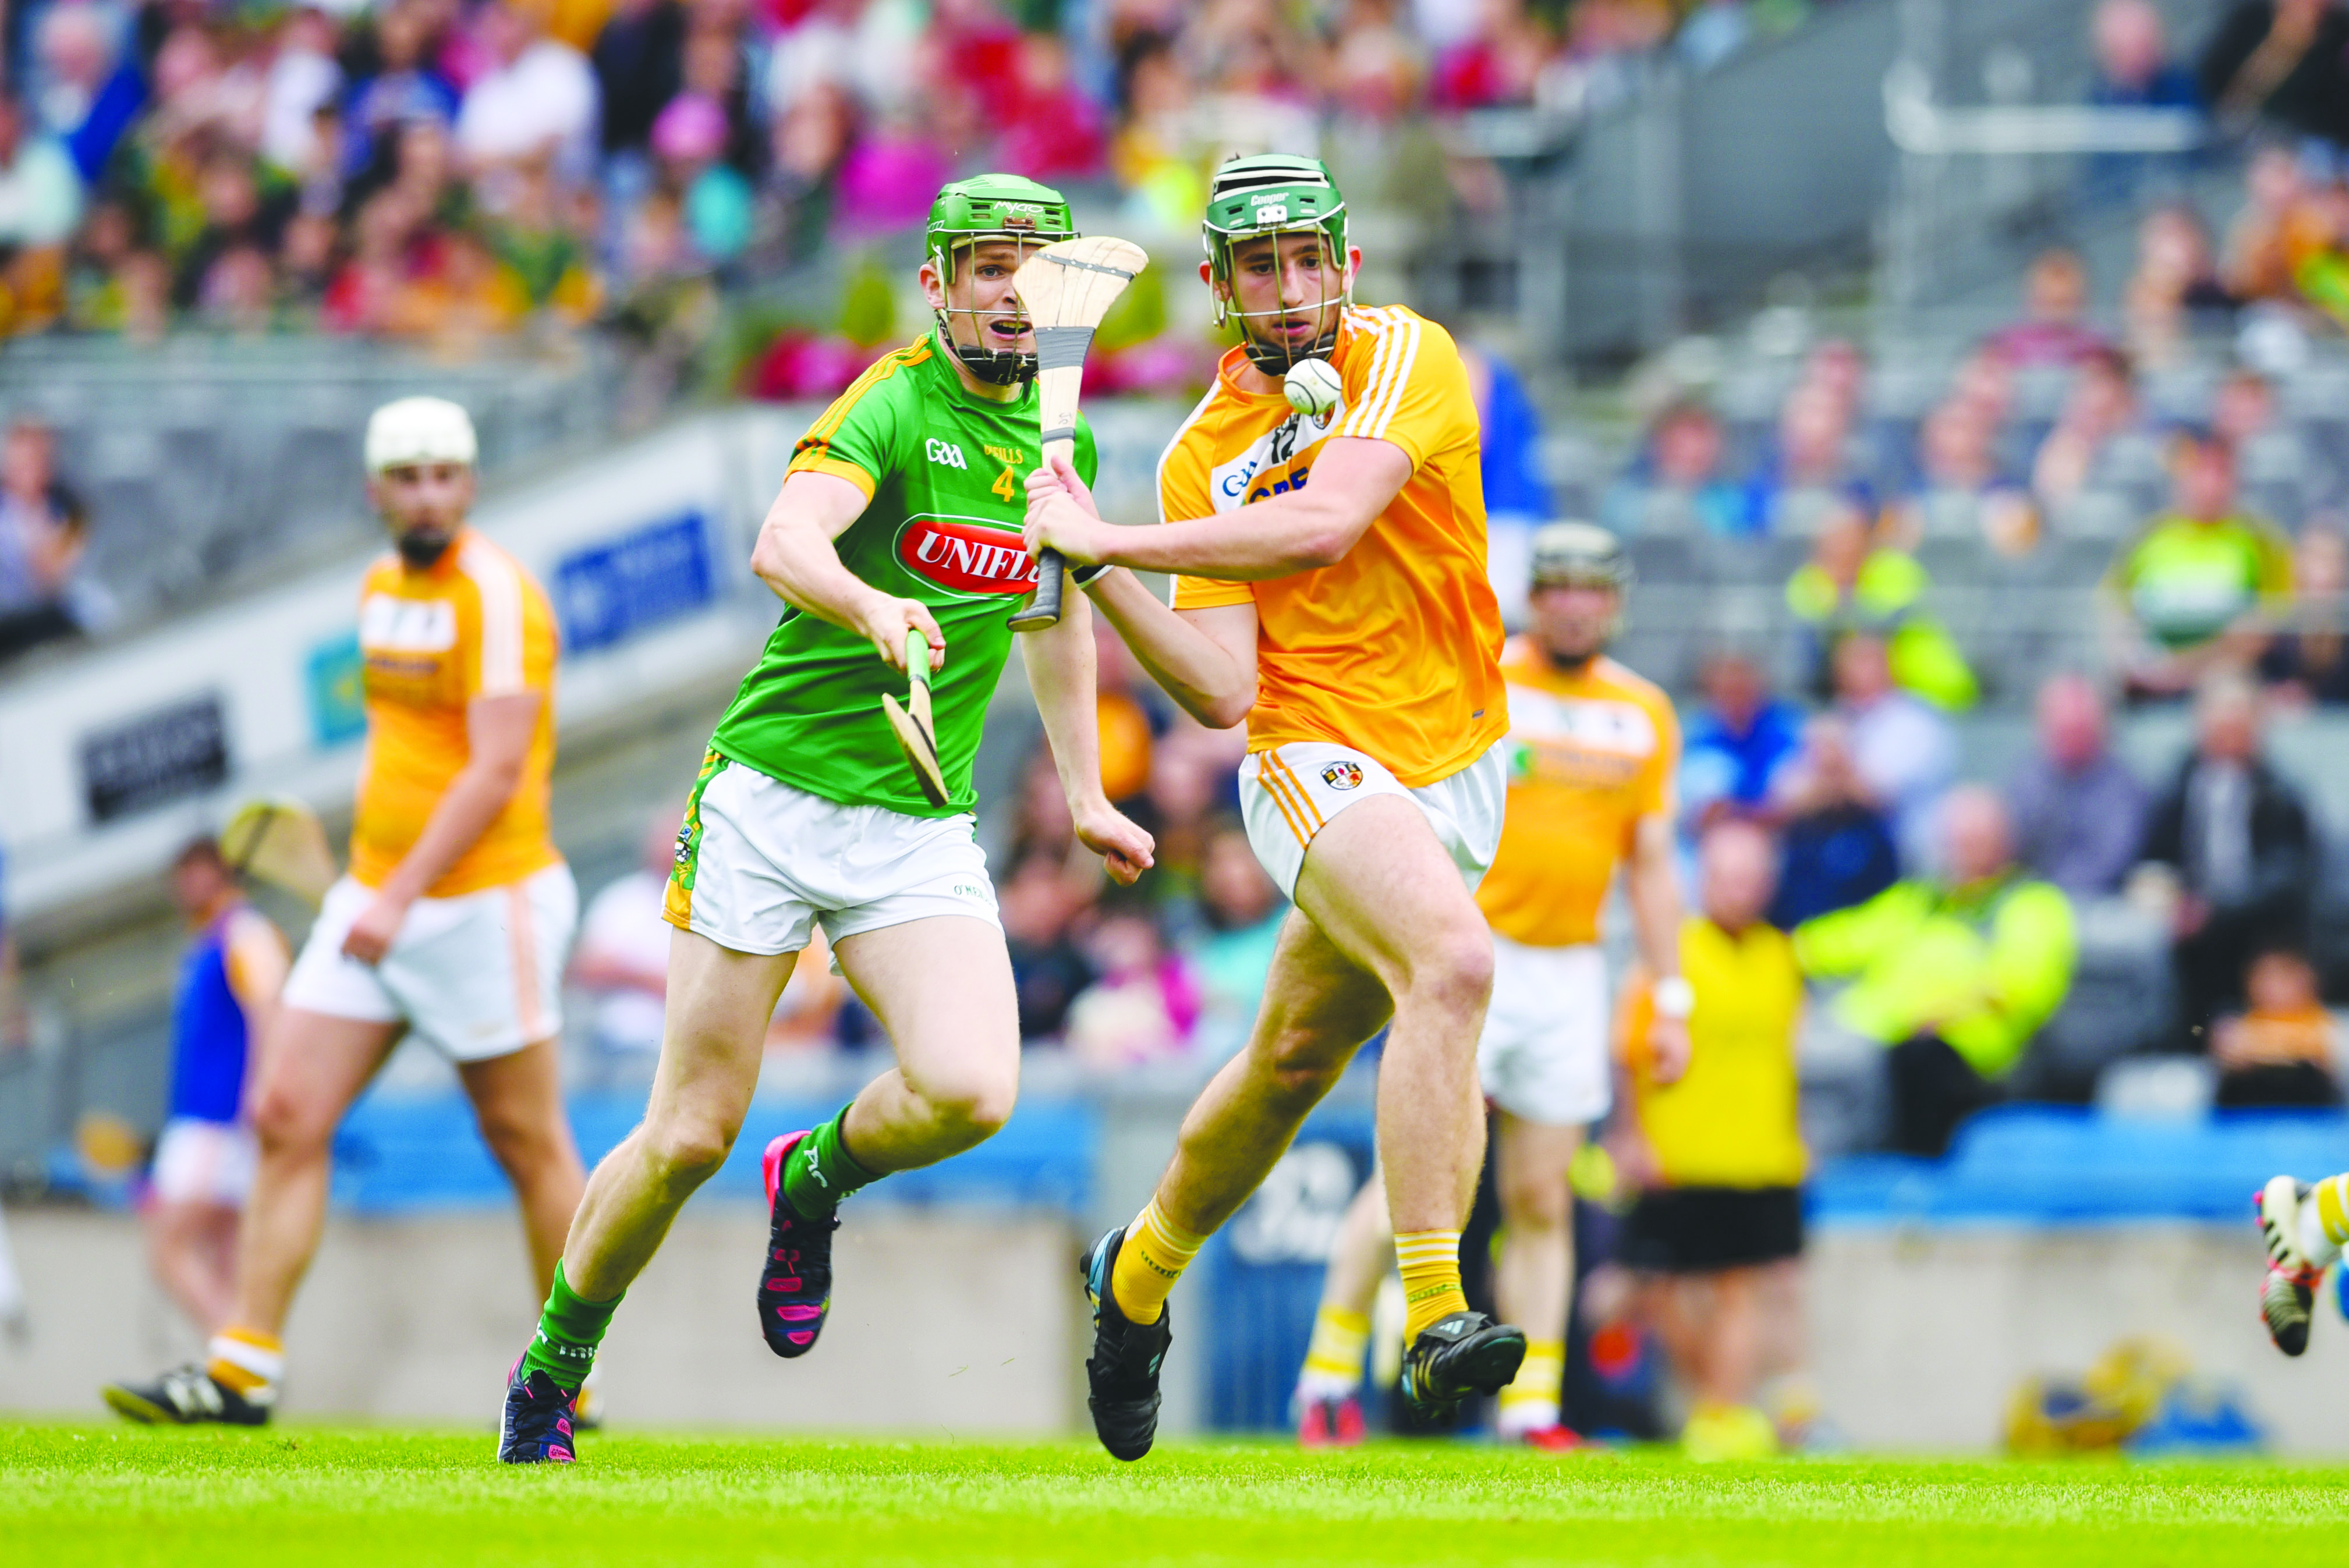 Antrim U21s have been boosted by the return of senior panelists James Connolly, pictured in action during the Christy Ring Cup final against Meath, and Ryan McCambridge ahead of Saturday’s All-Ireland U21 semi-final against Waterford in Thurles